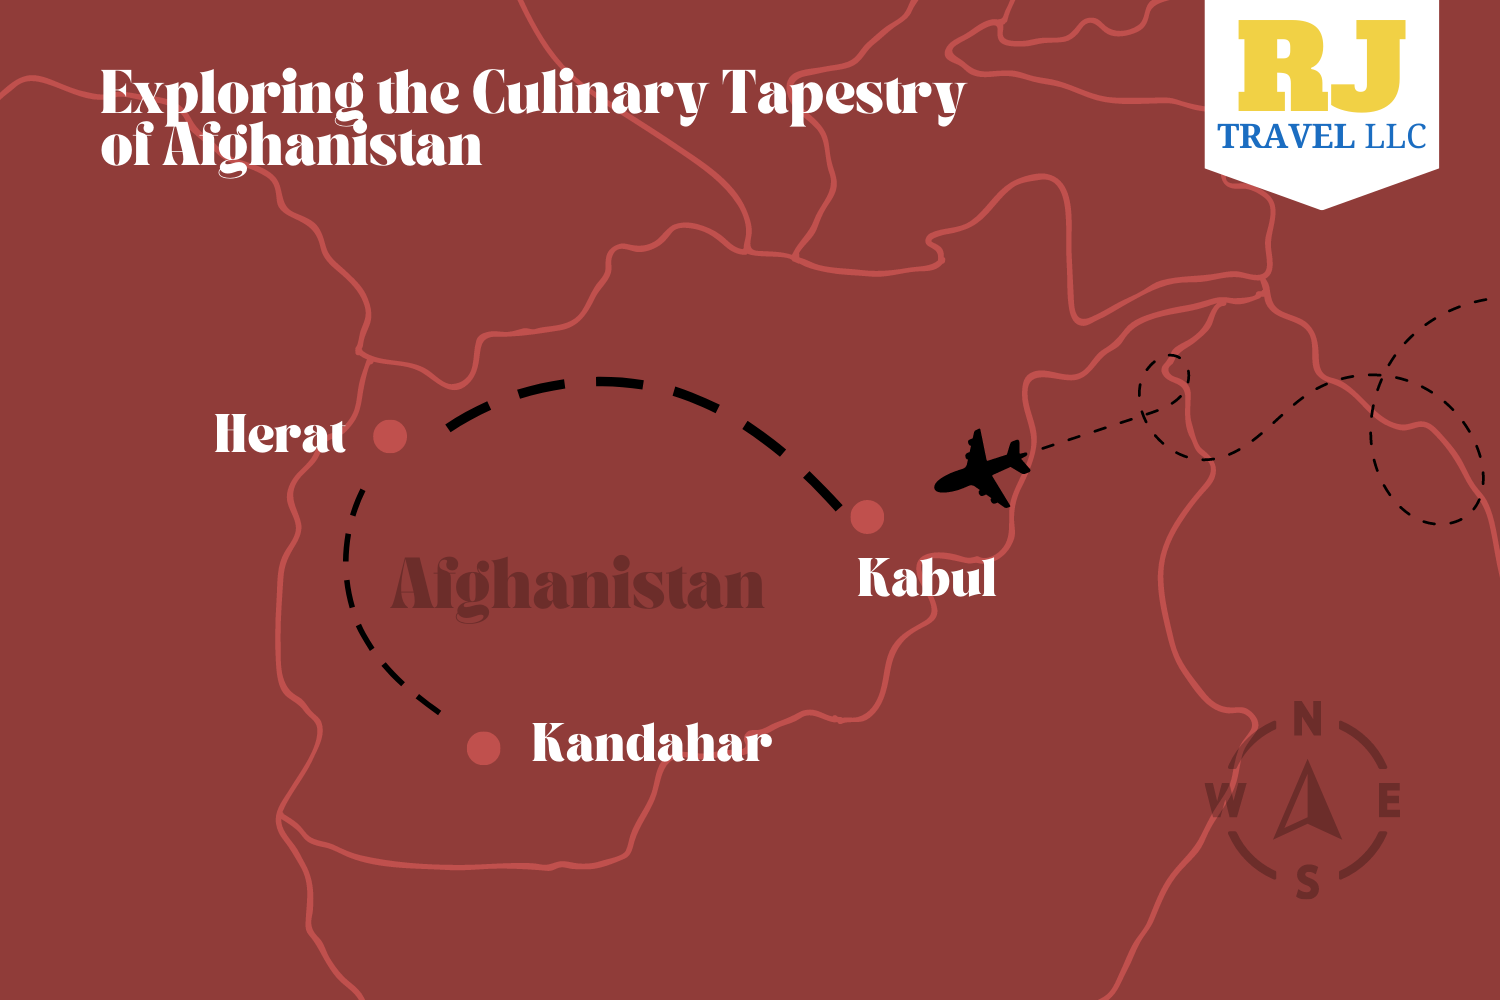 Exploring the Culinary Tapestry of Afghanistan